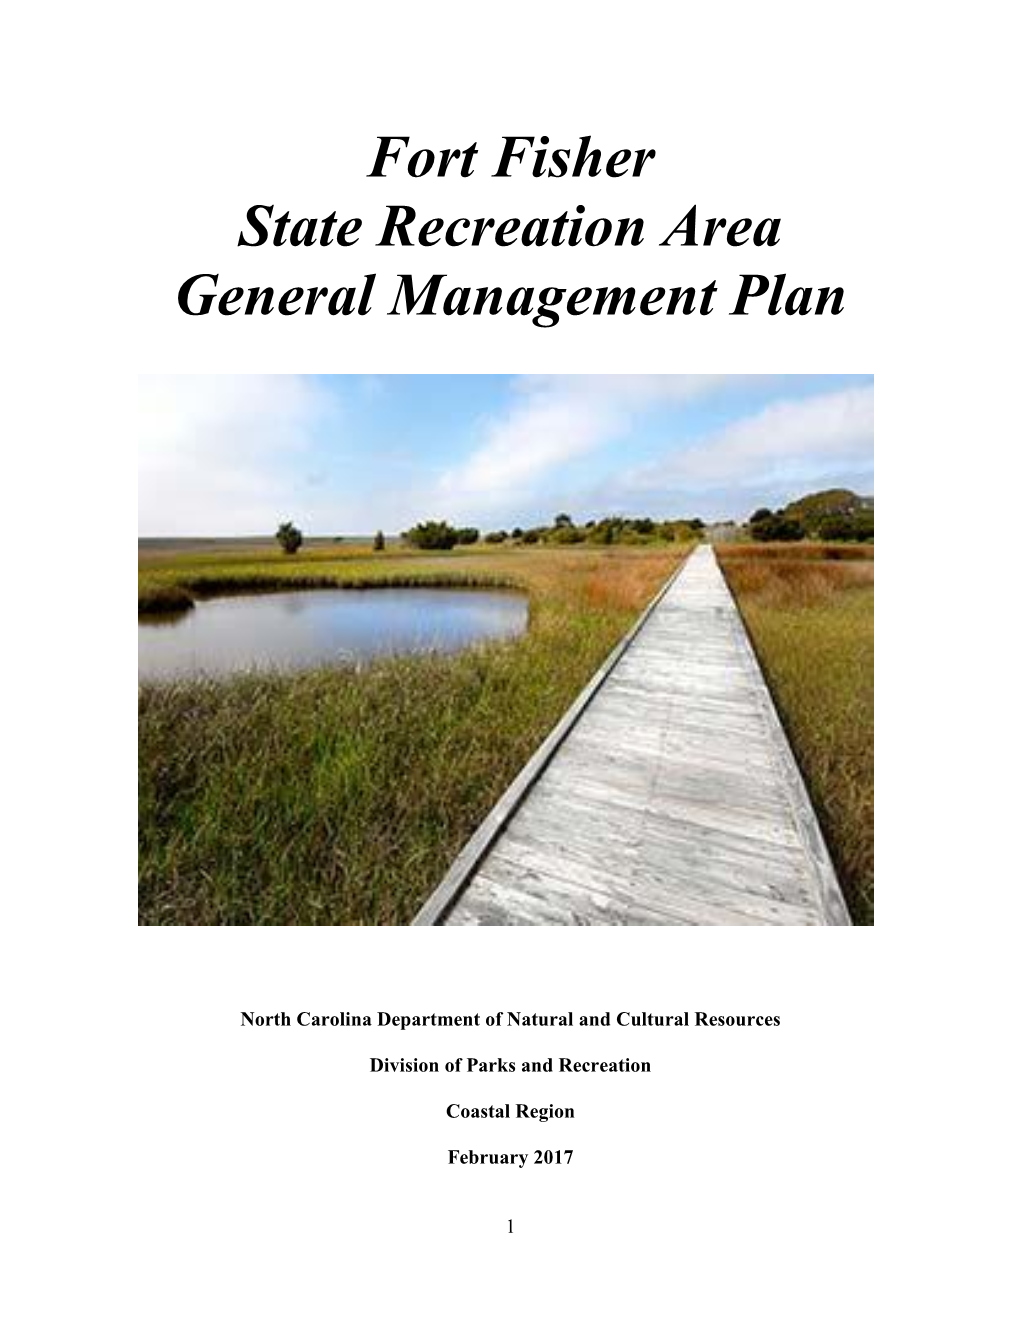 Fort Fisher State Recreation Area General Management Plan